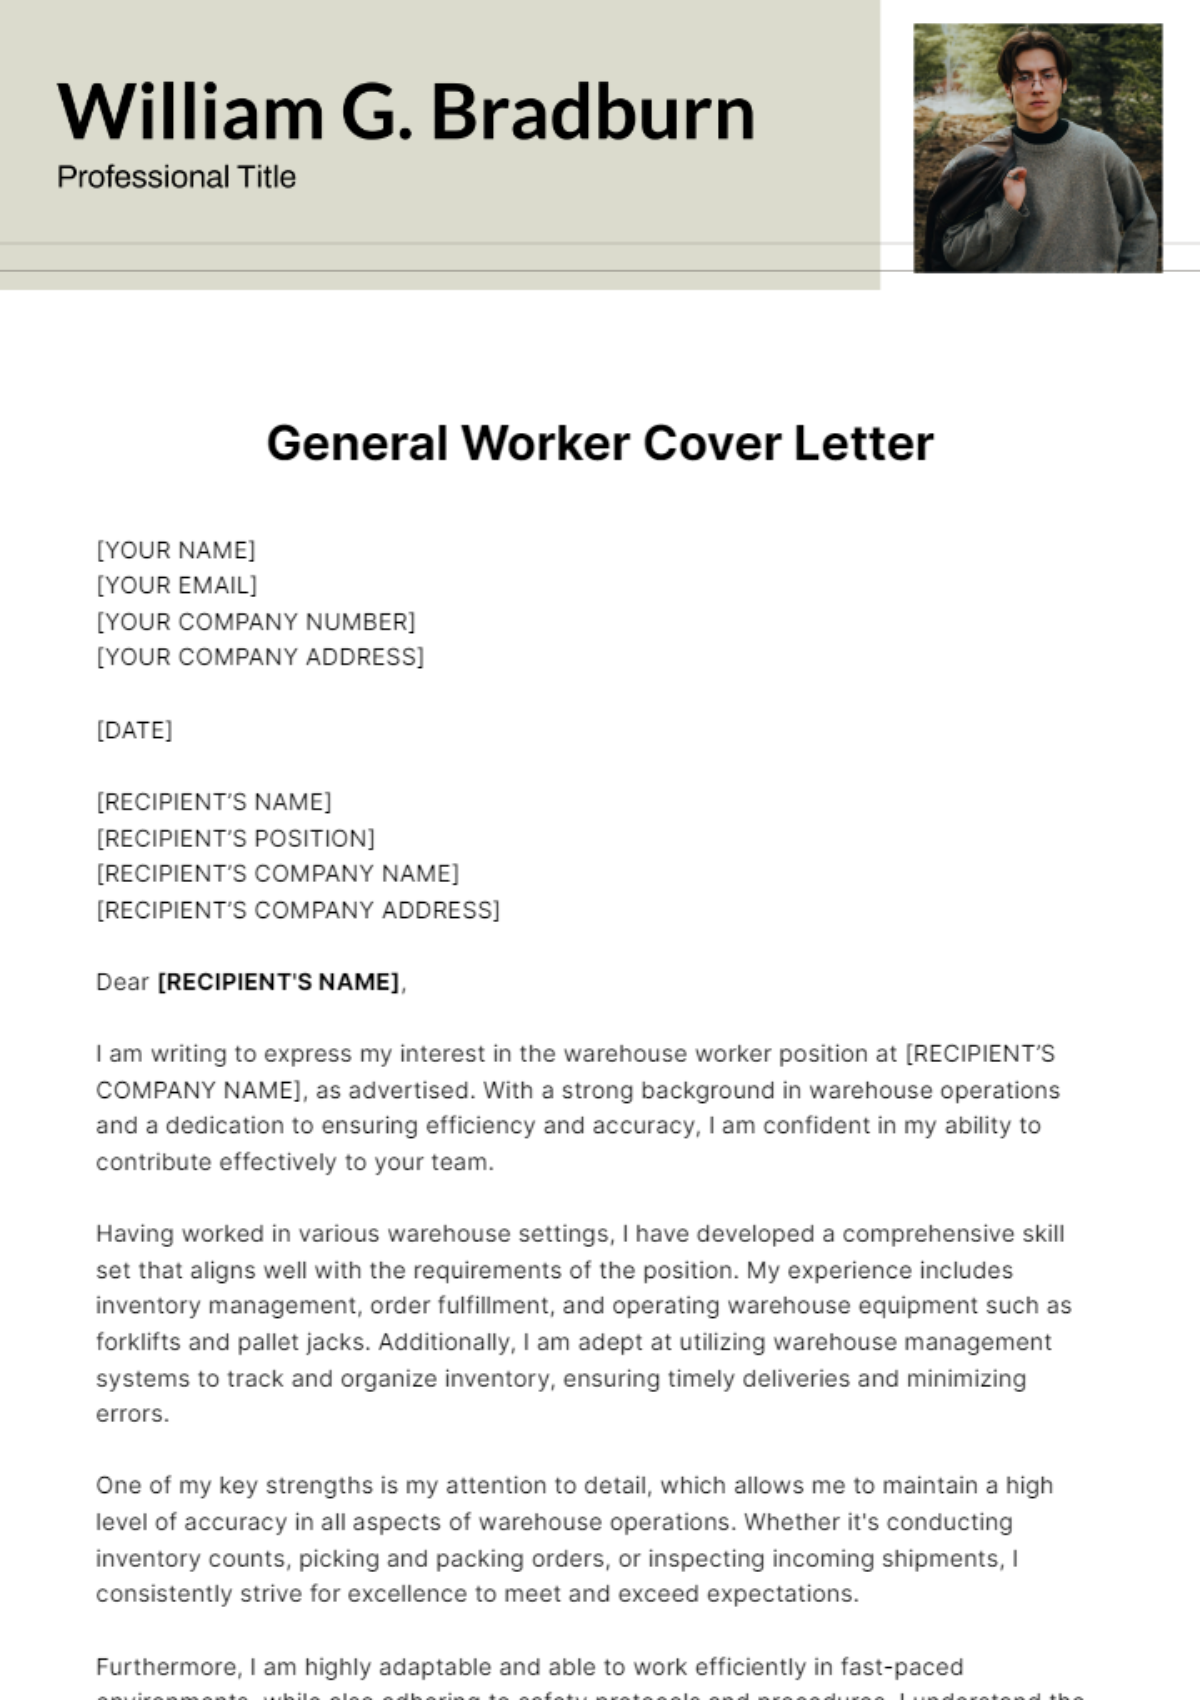 General Worker Cover Letter Template